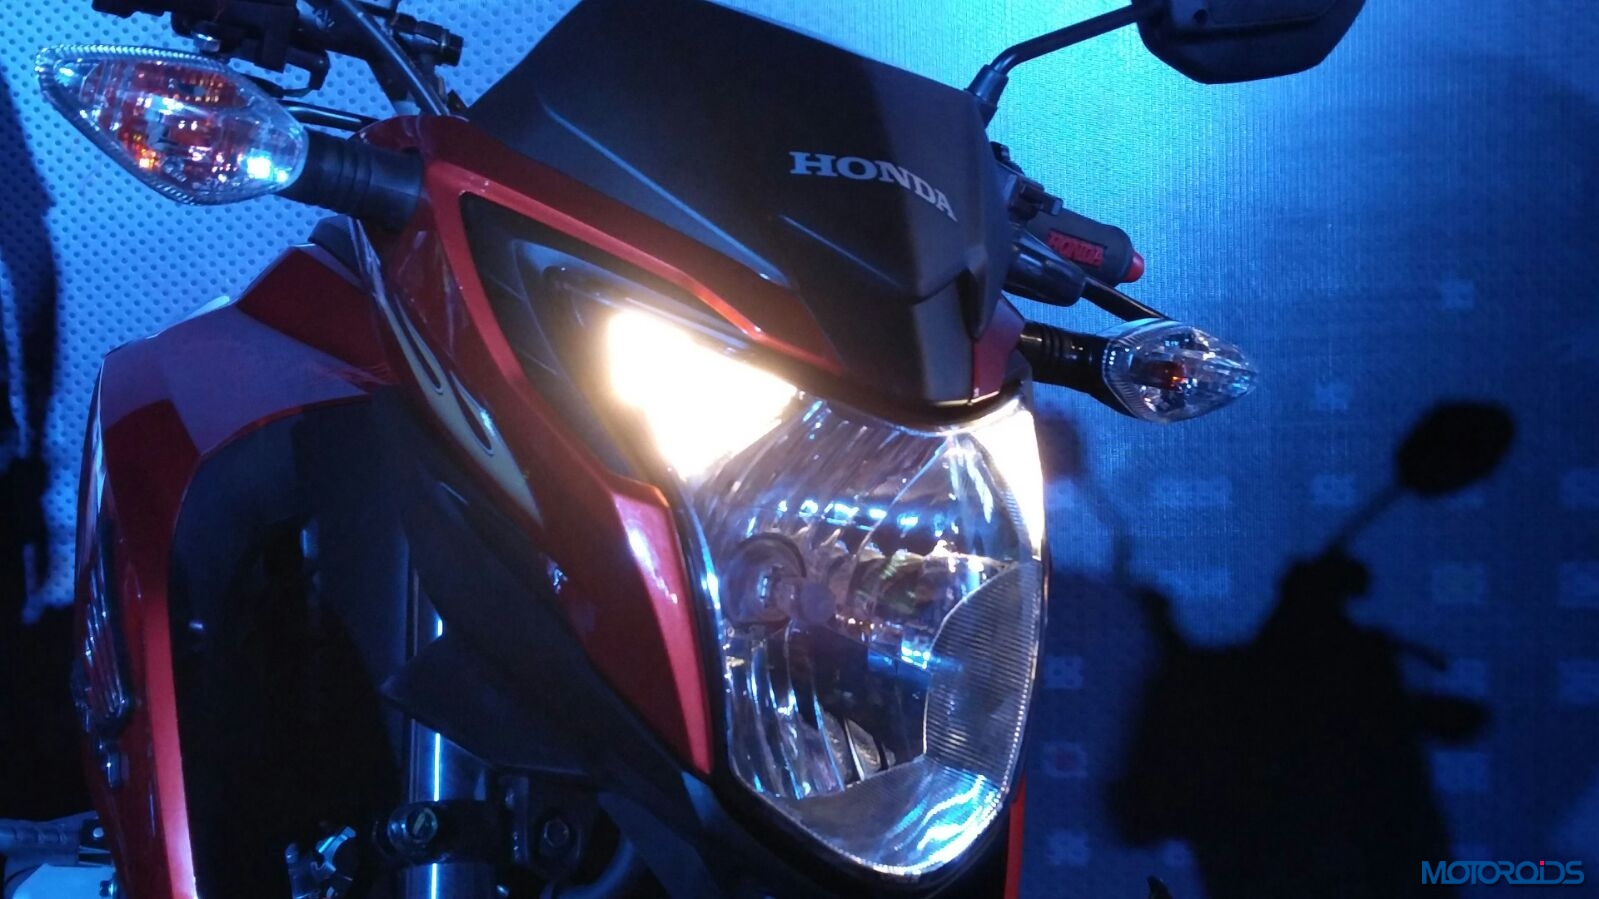 The Honda Cb Hornet 160r App Is Well Received Reaches 10 000